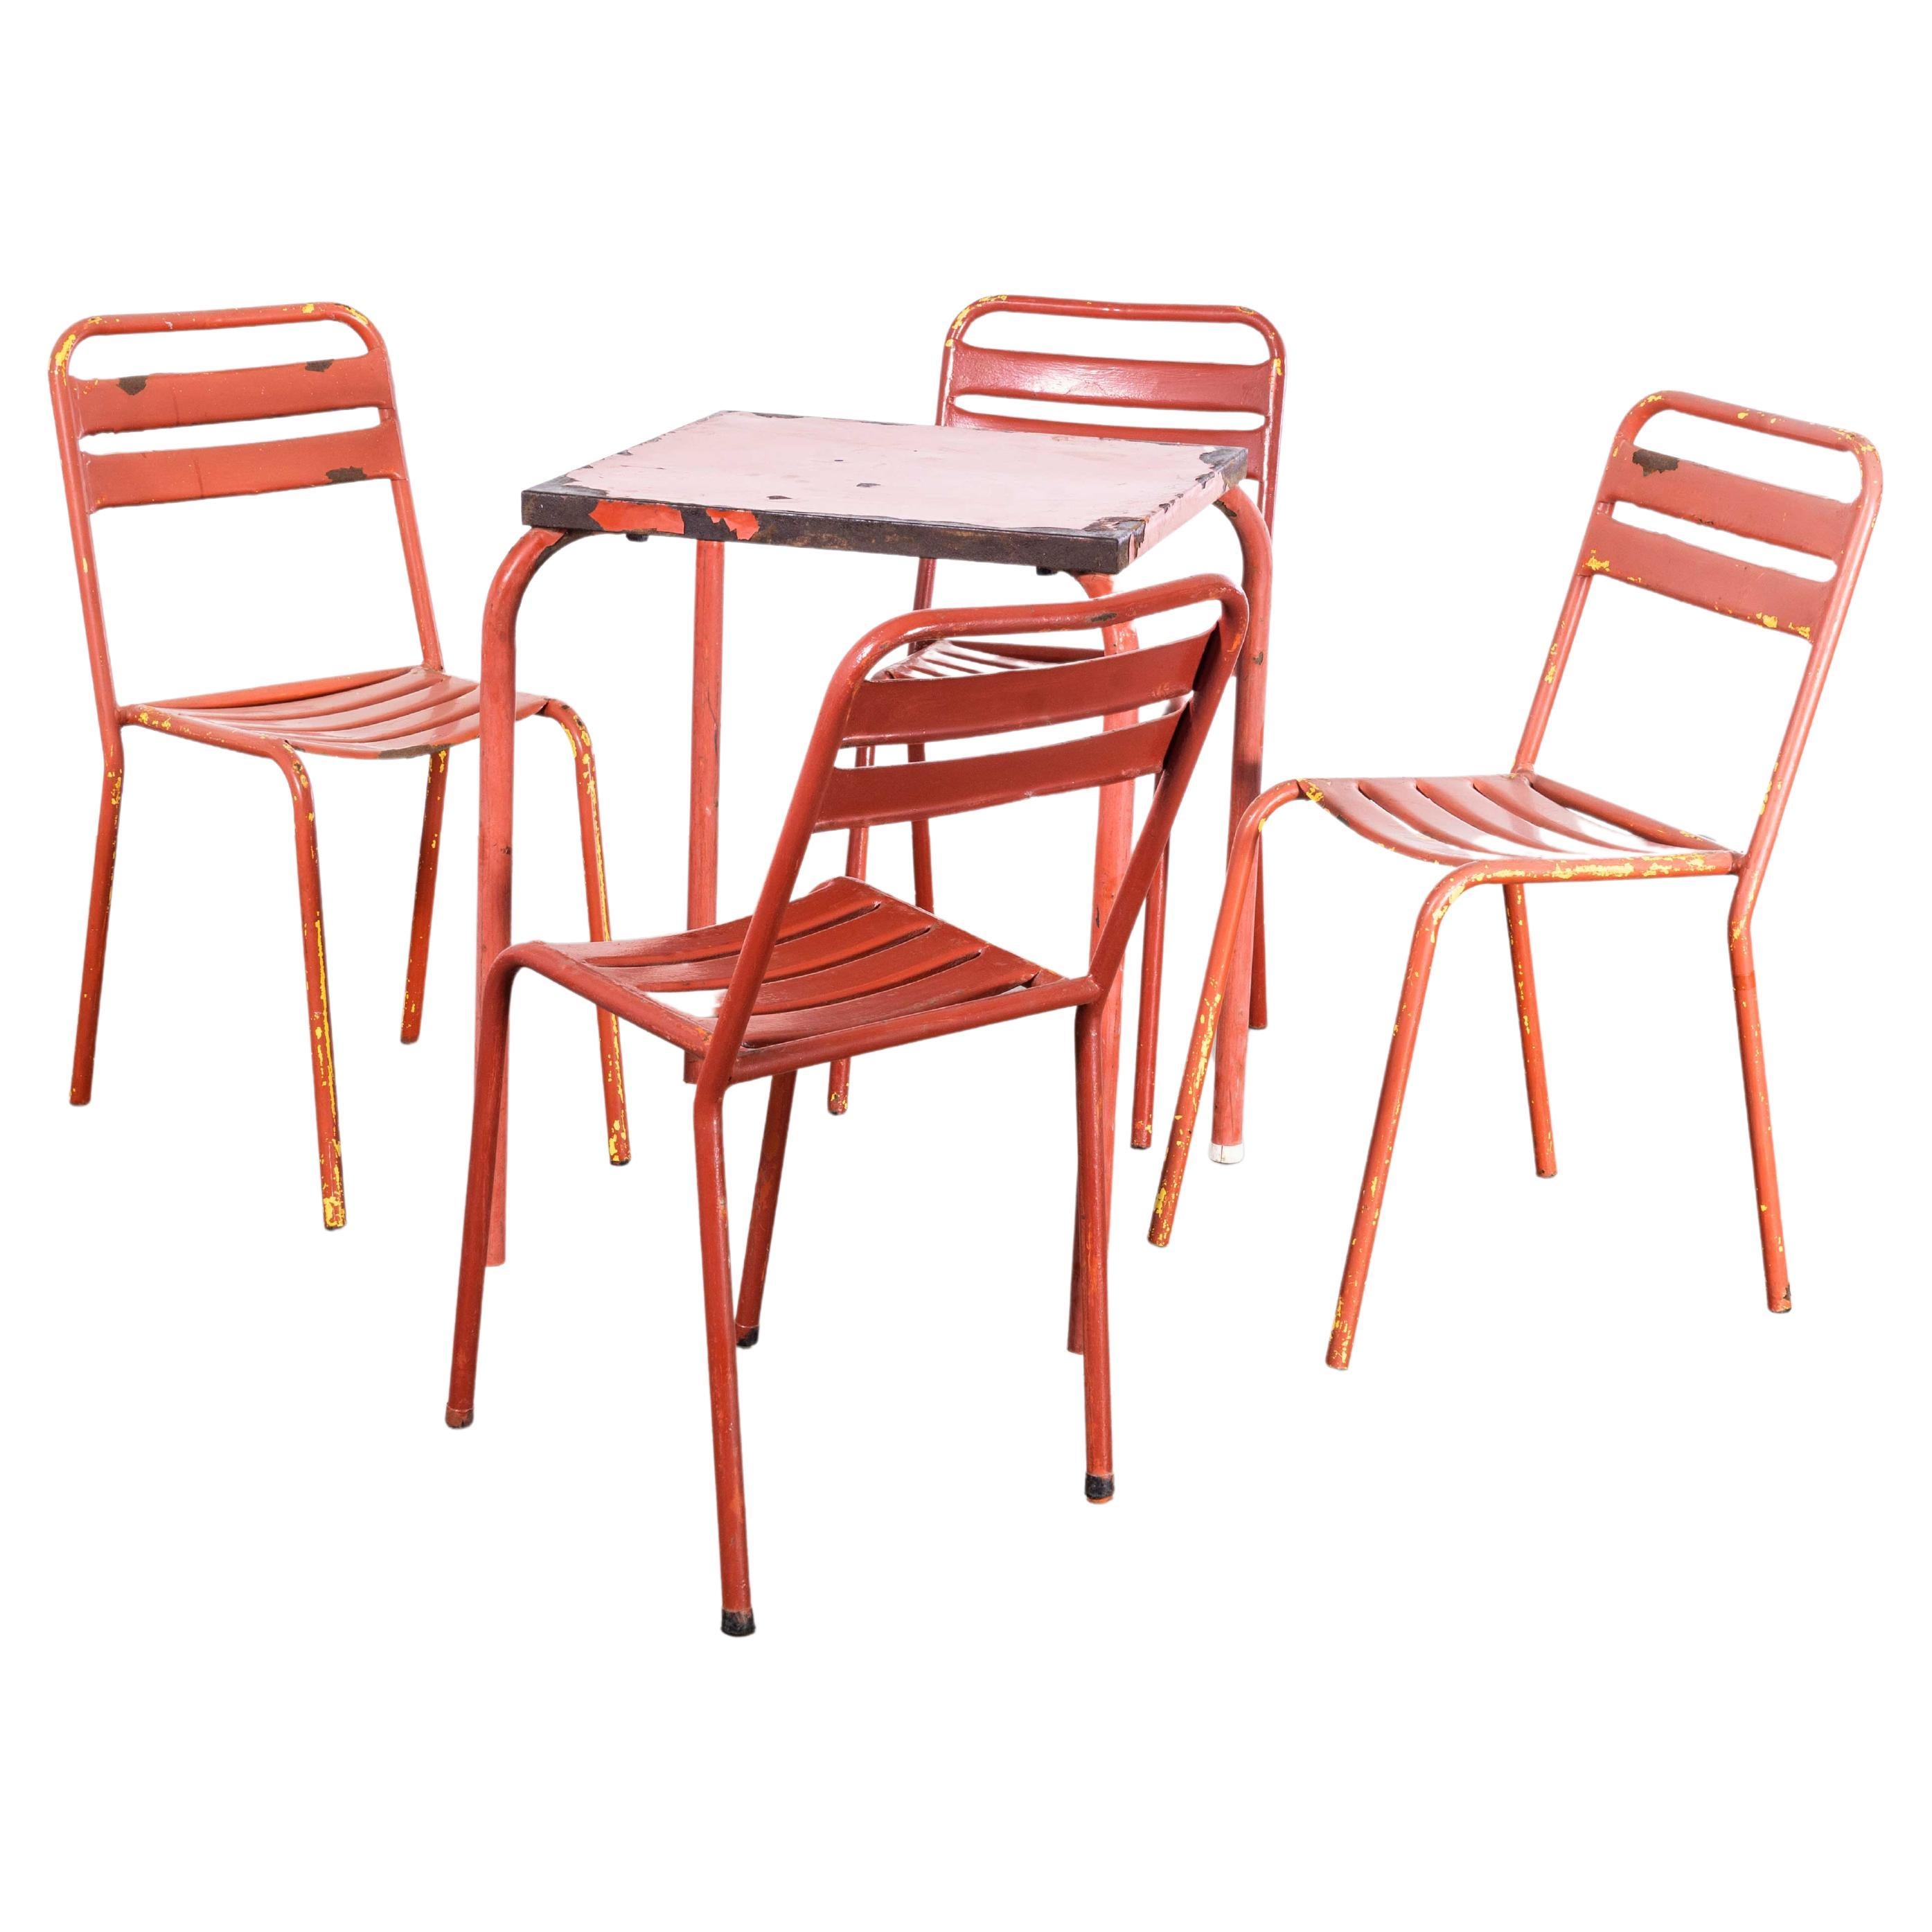 1950's Original French Outdoor Table And Chair Set - Four Chairs (2616) For Sale